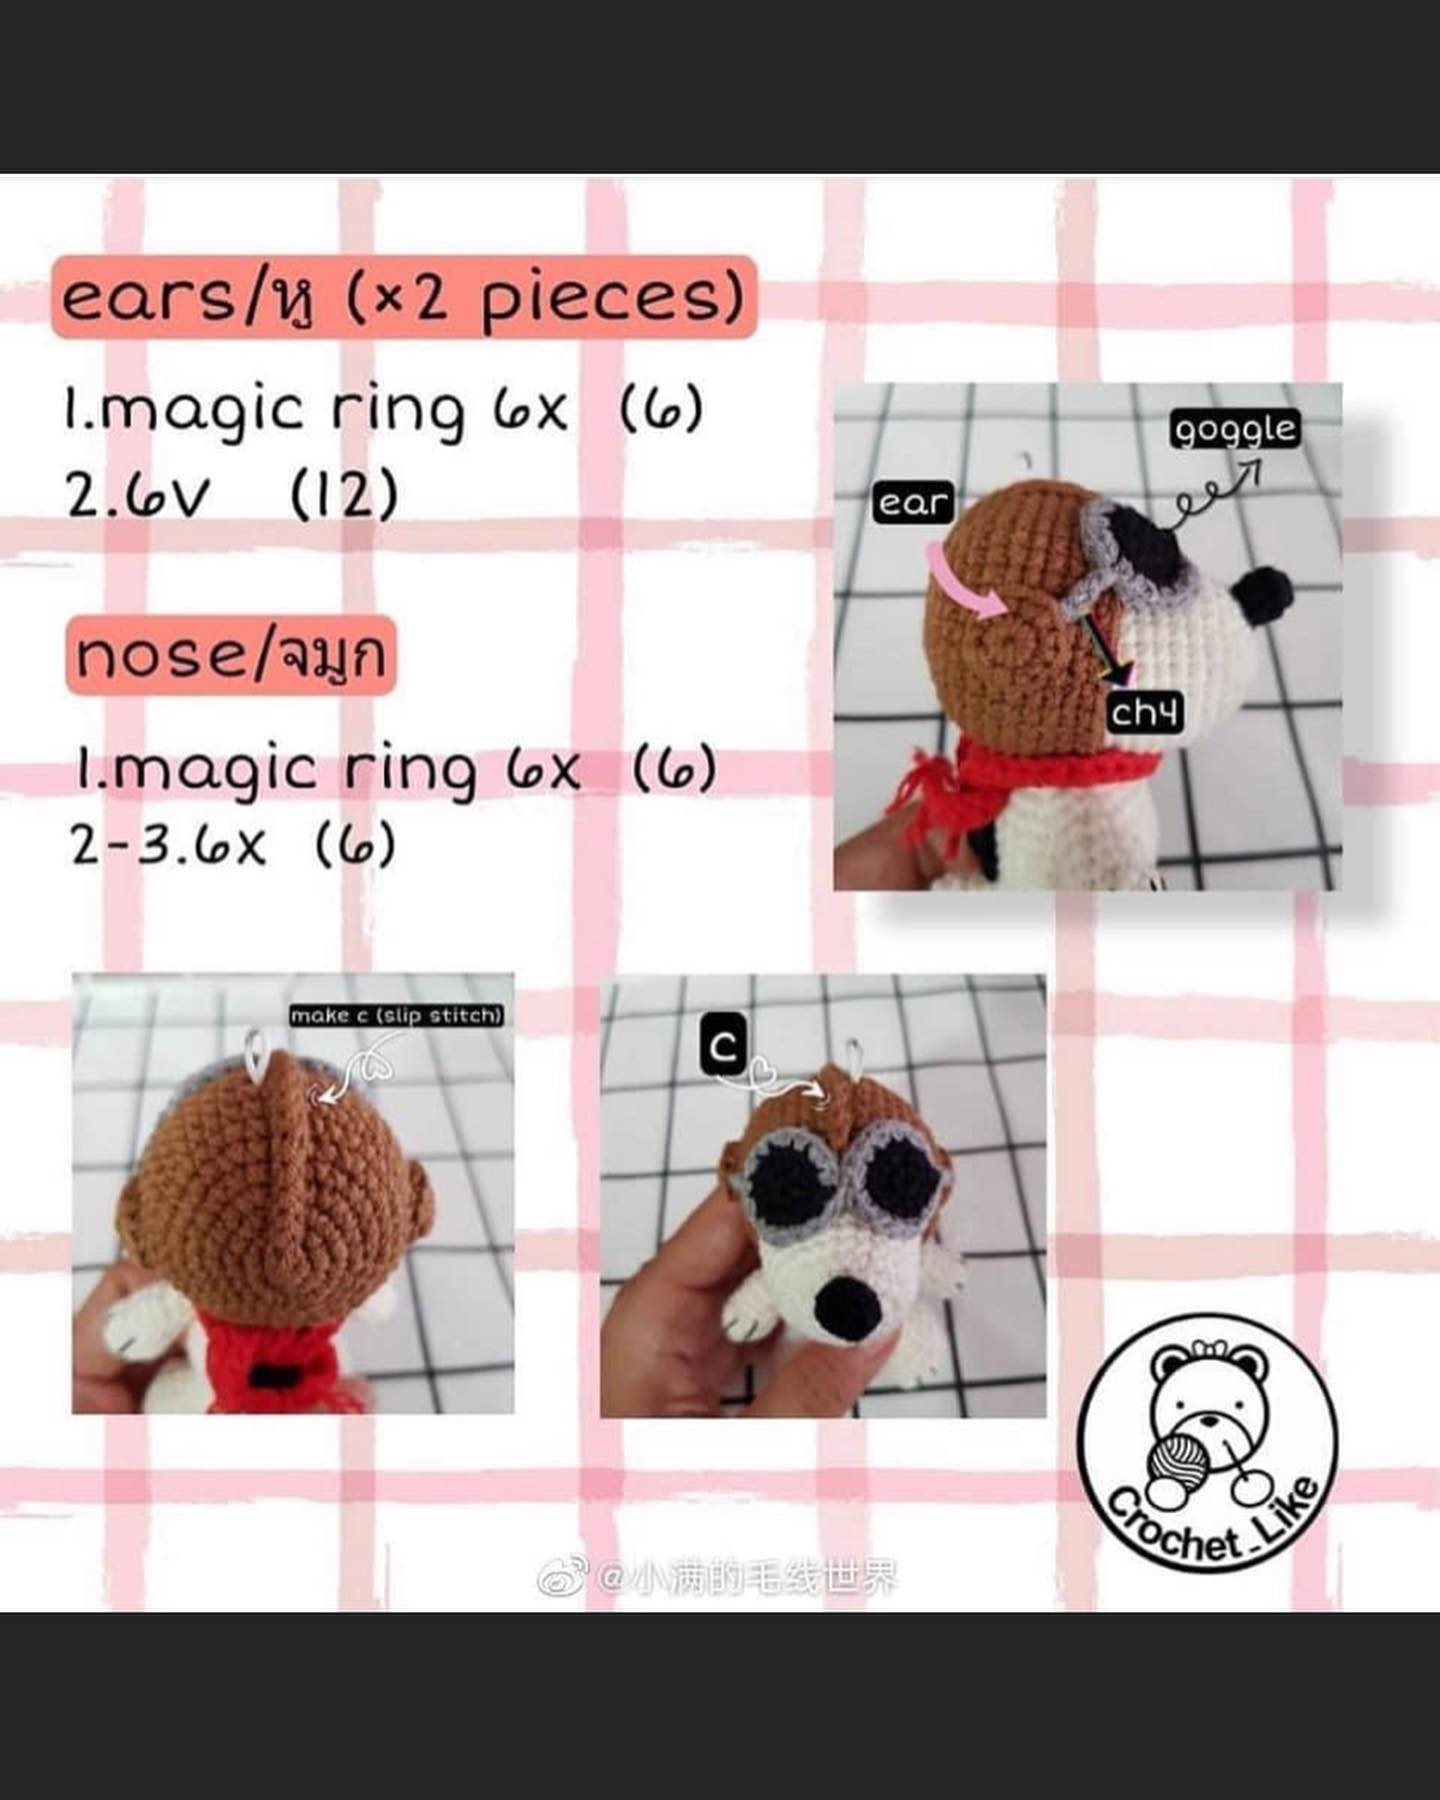 dog with glasses wearing brown hat, red scarf crochet pattern